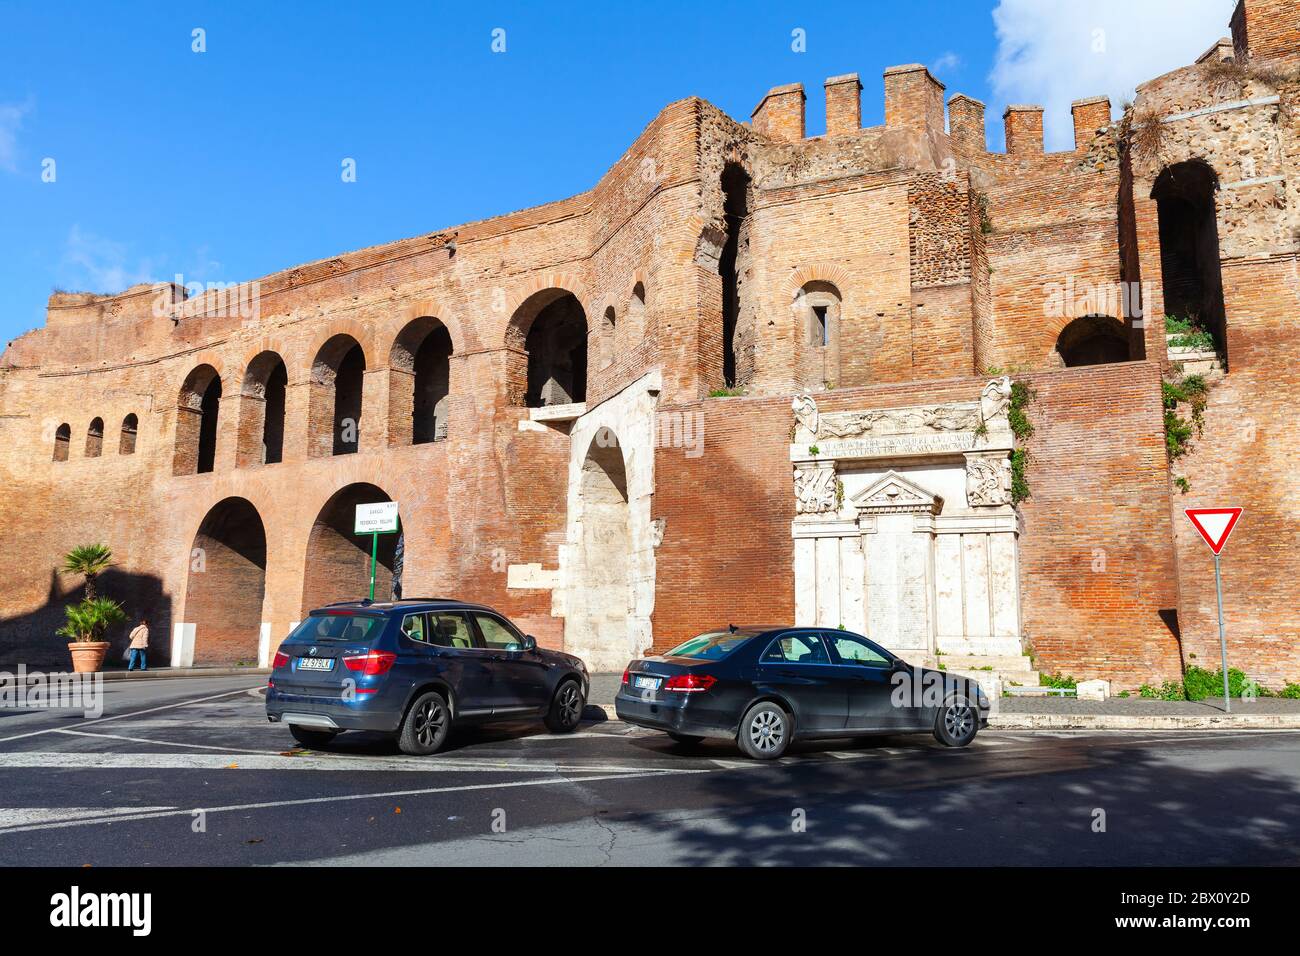 Rome, Italy - February 13, 2016: Rome street view with parked cars near old fortification walls of Porta Pinciana, it is a gate of the Aurelian Walls Stock Photo